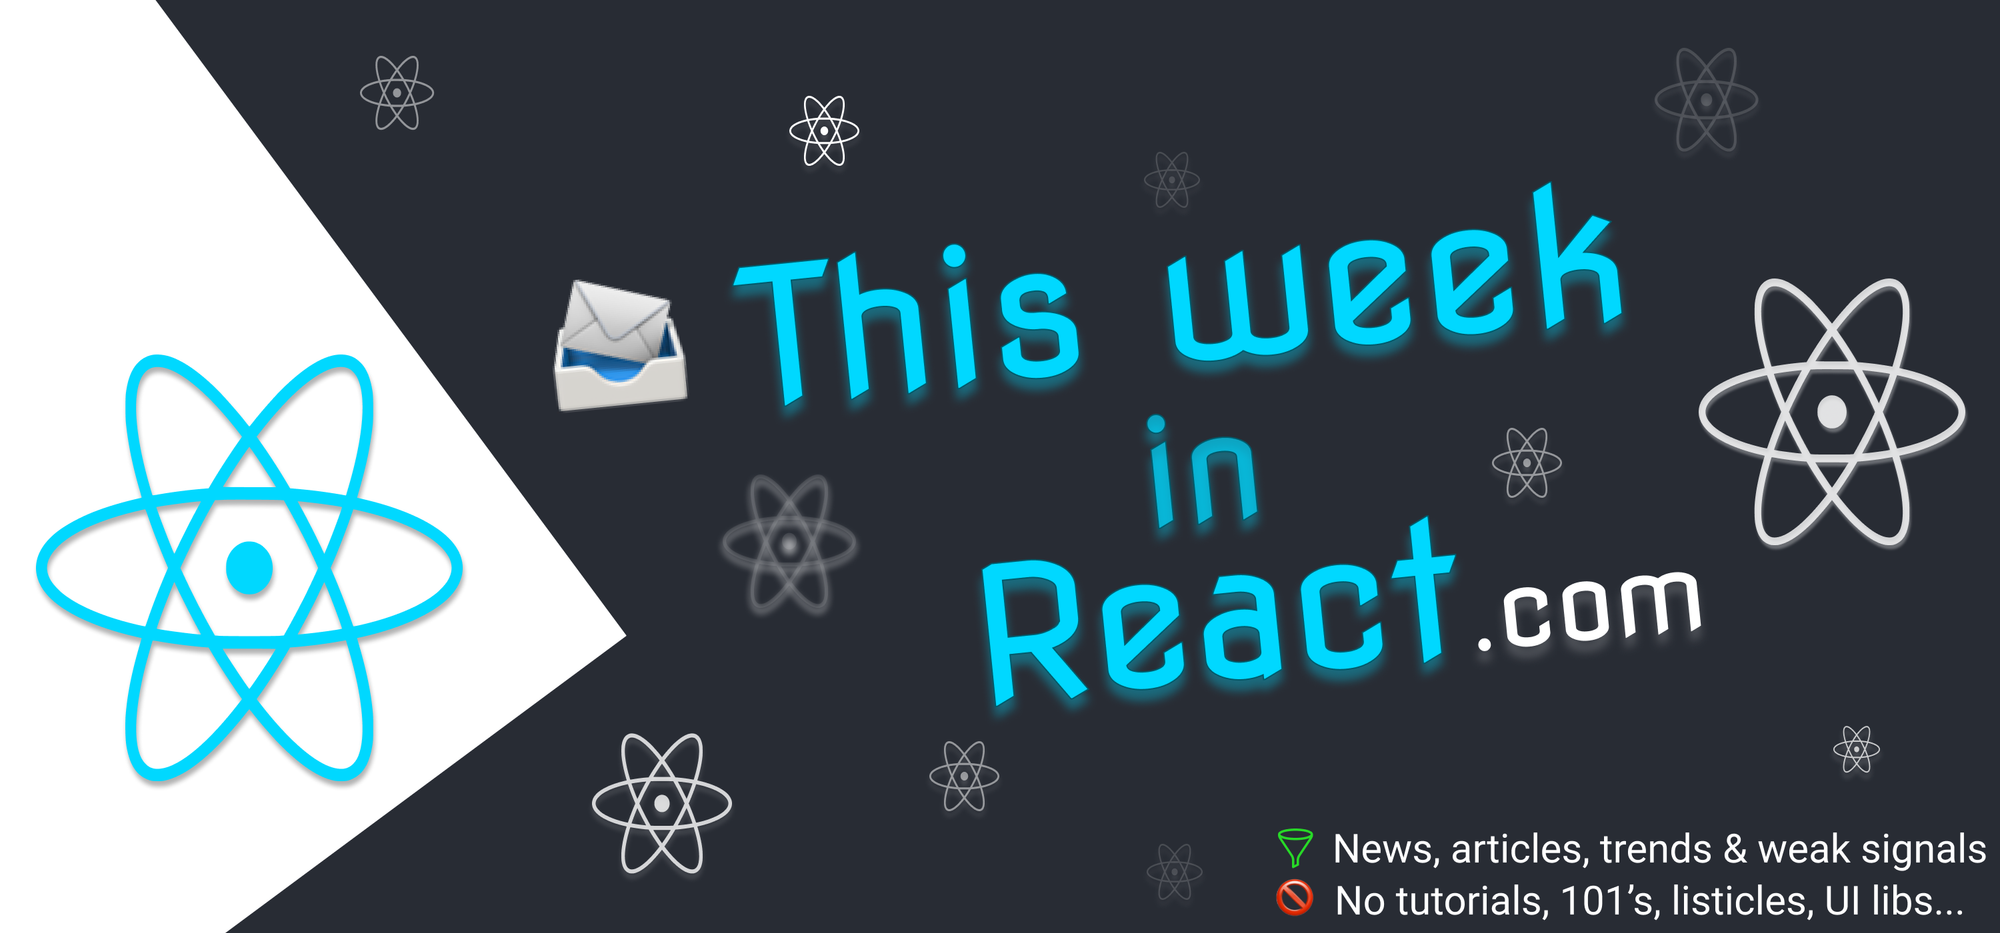 This Week In React #133: Astro, React dying?, Qwikify, CRA, Next.js, Remix, Redux, Storybook, Redwood, Nextra, React-Native... | This Week In React